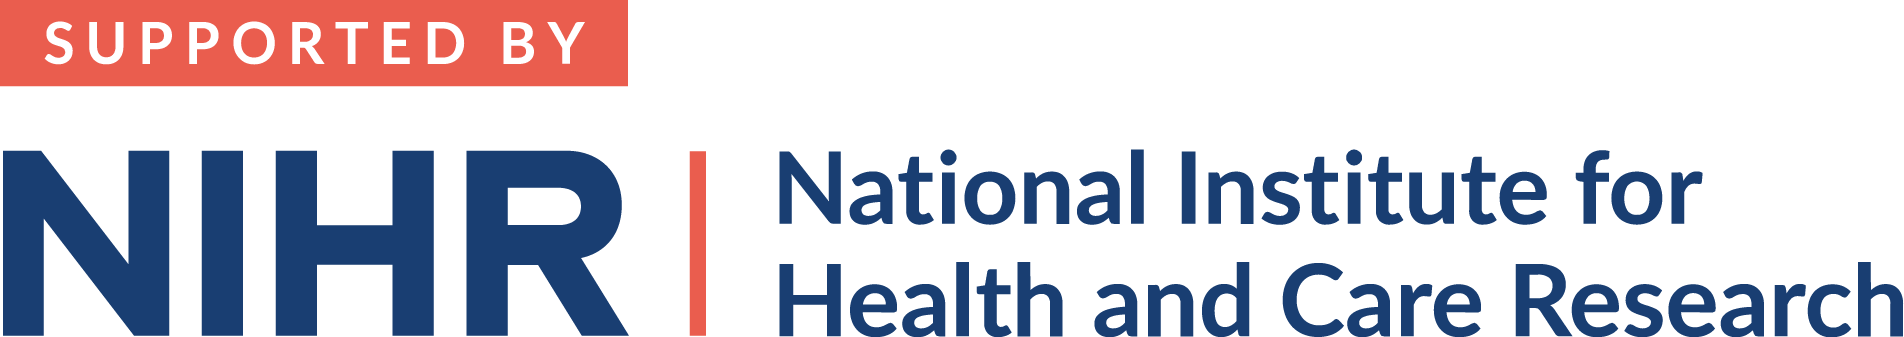 National Institute for Health and Care Research (NIHR)